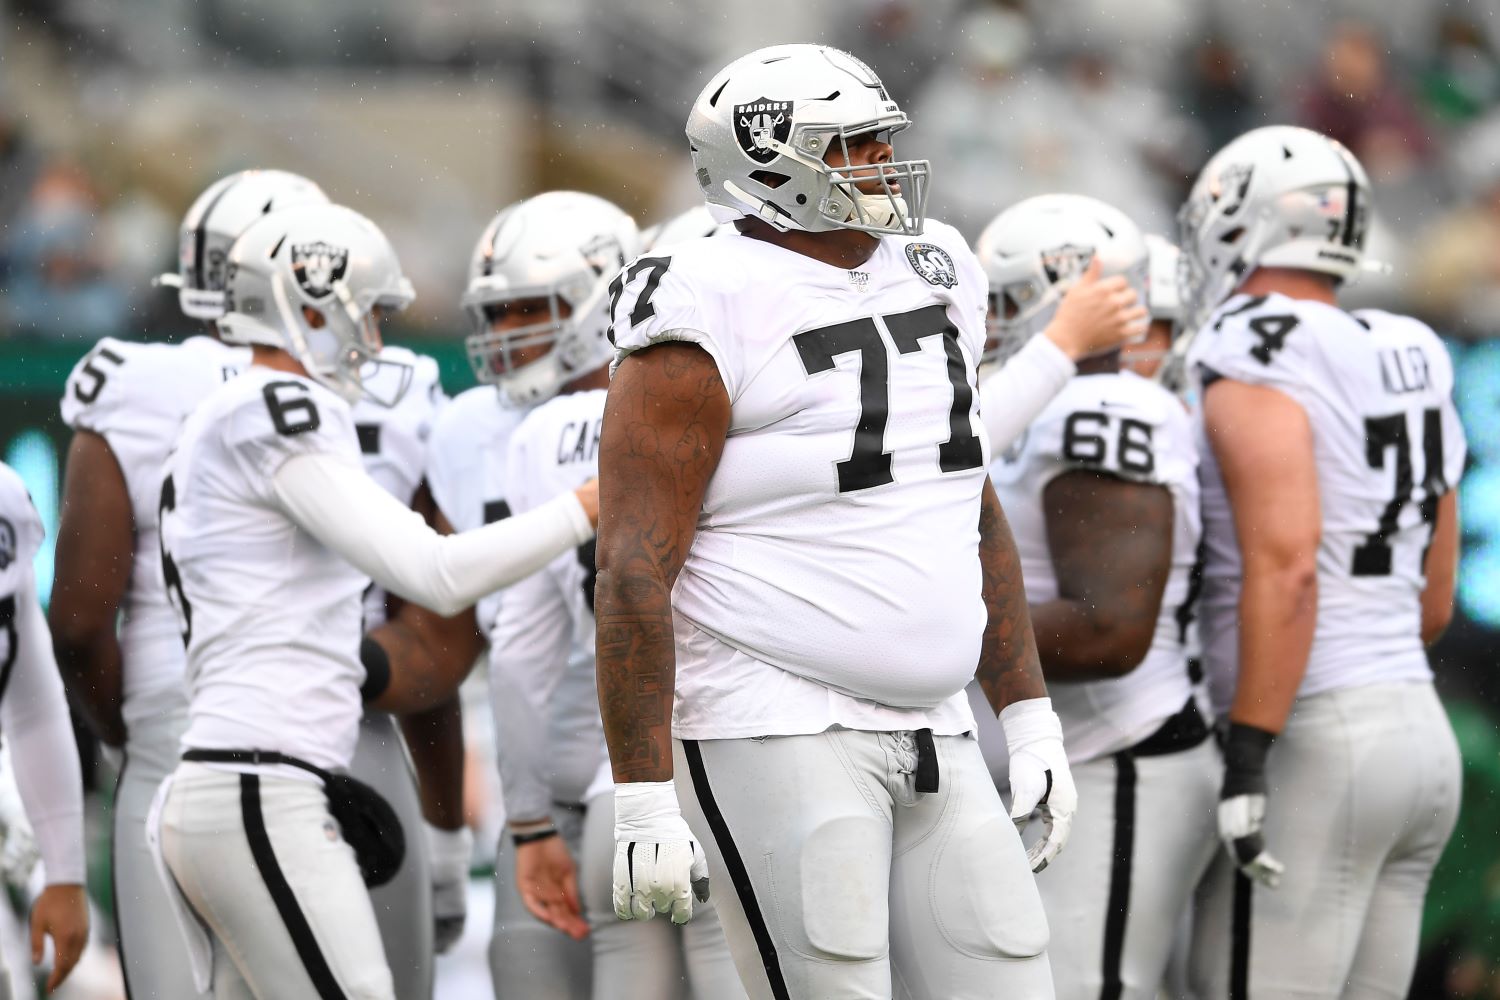 With Trent Brown landing on the reserve/COVID-19 list again, the Raiders will once again be without their $66 million star right tackle.